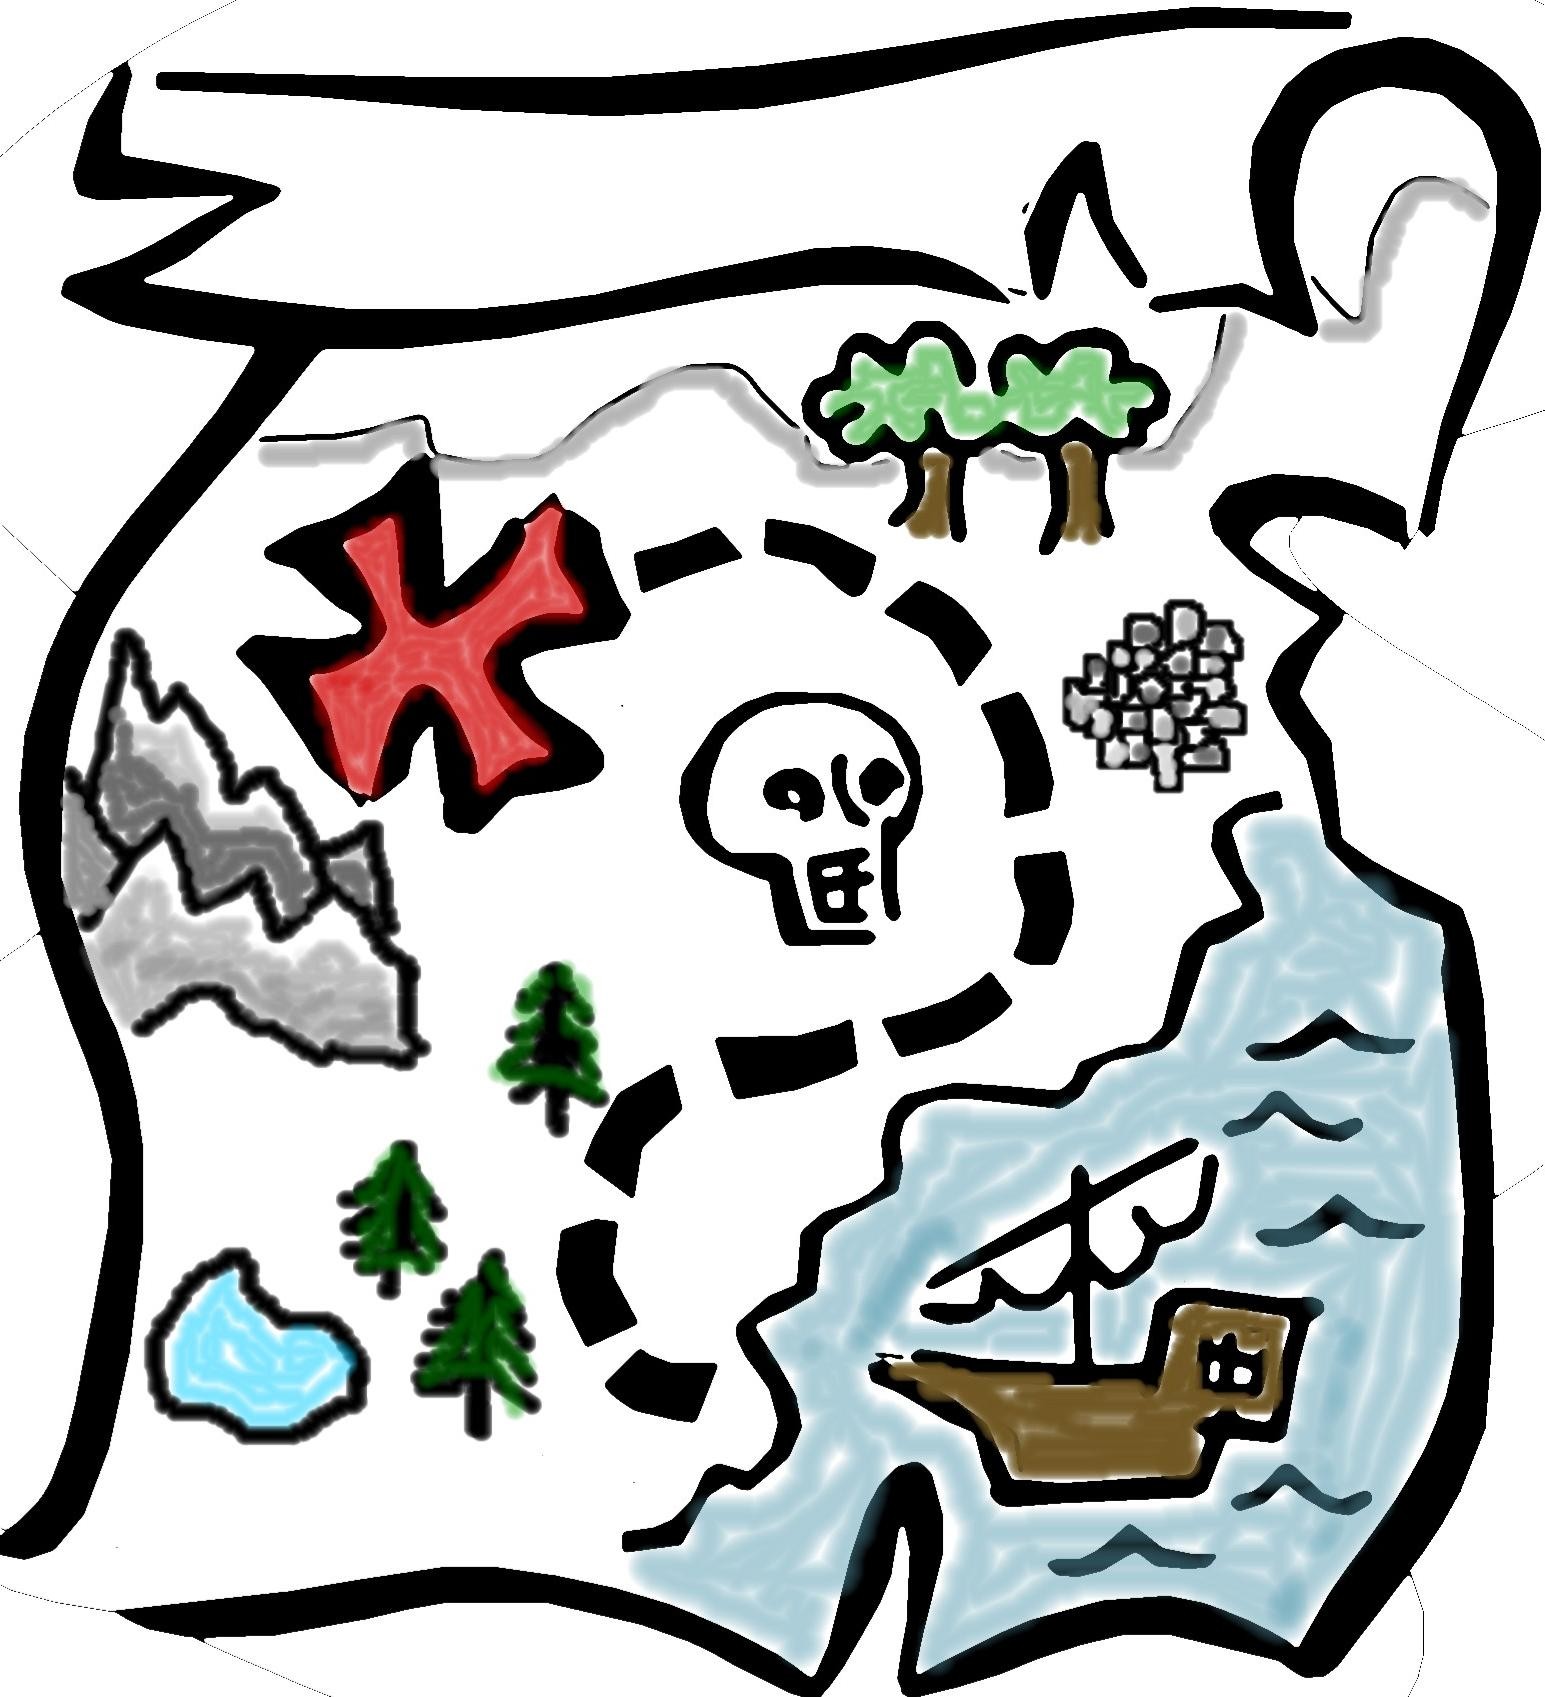 Treasure map clipart 4 » Clipart Station.